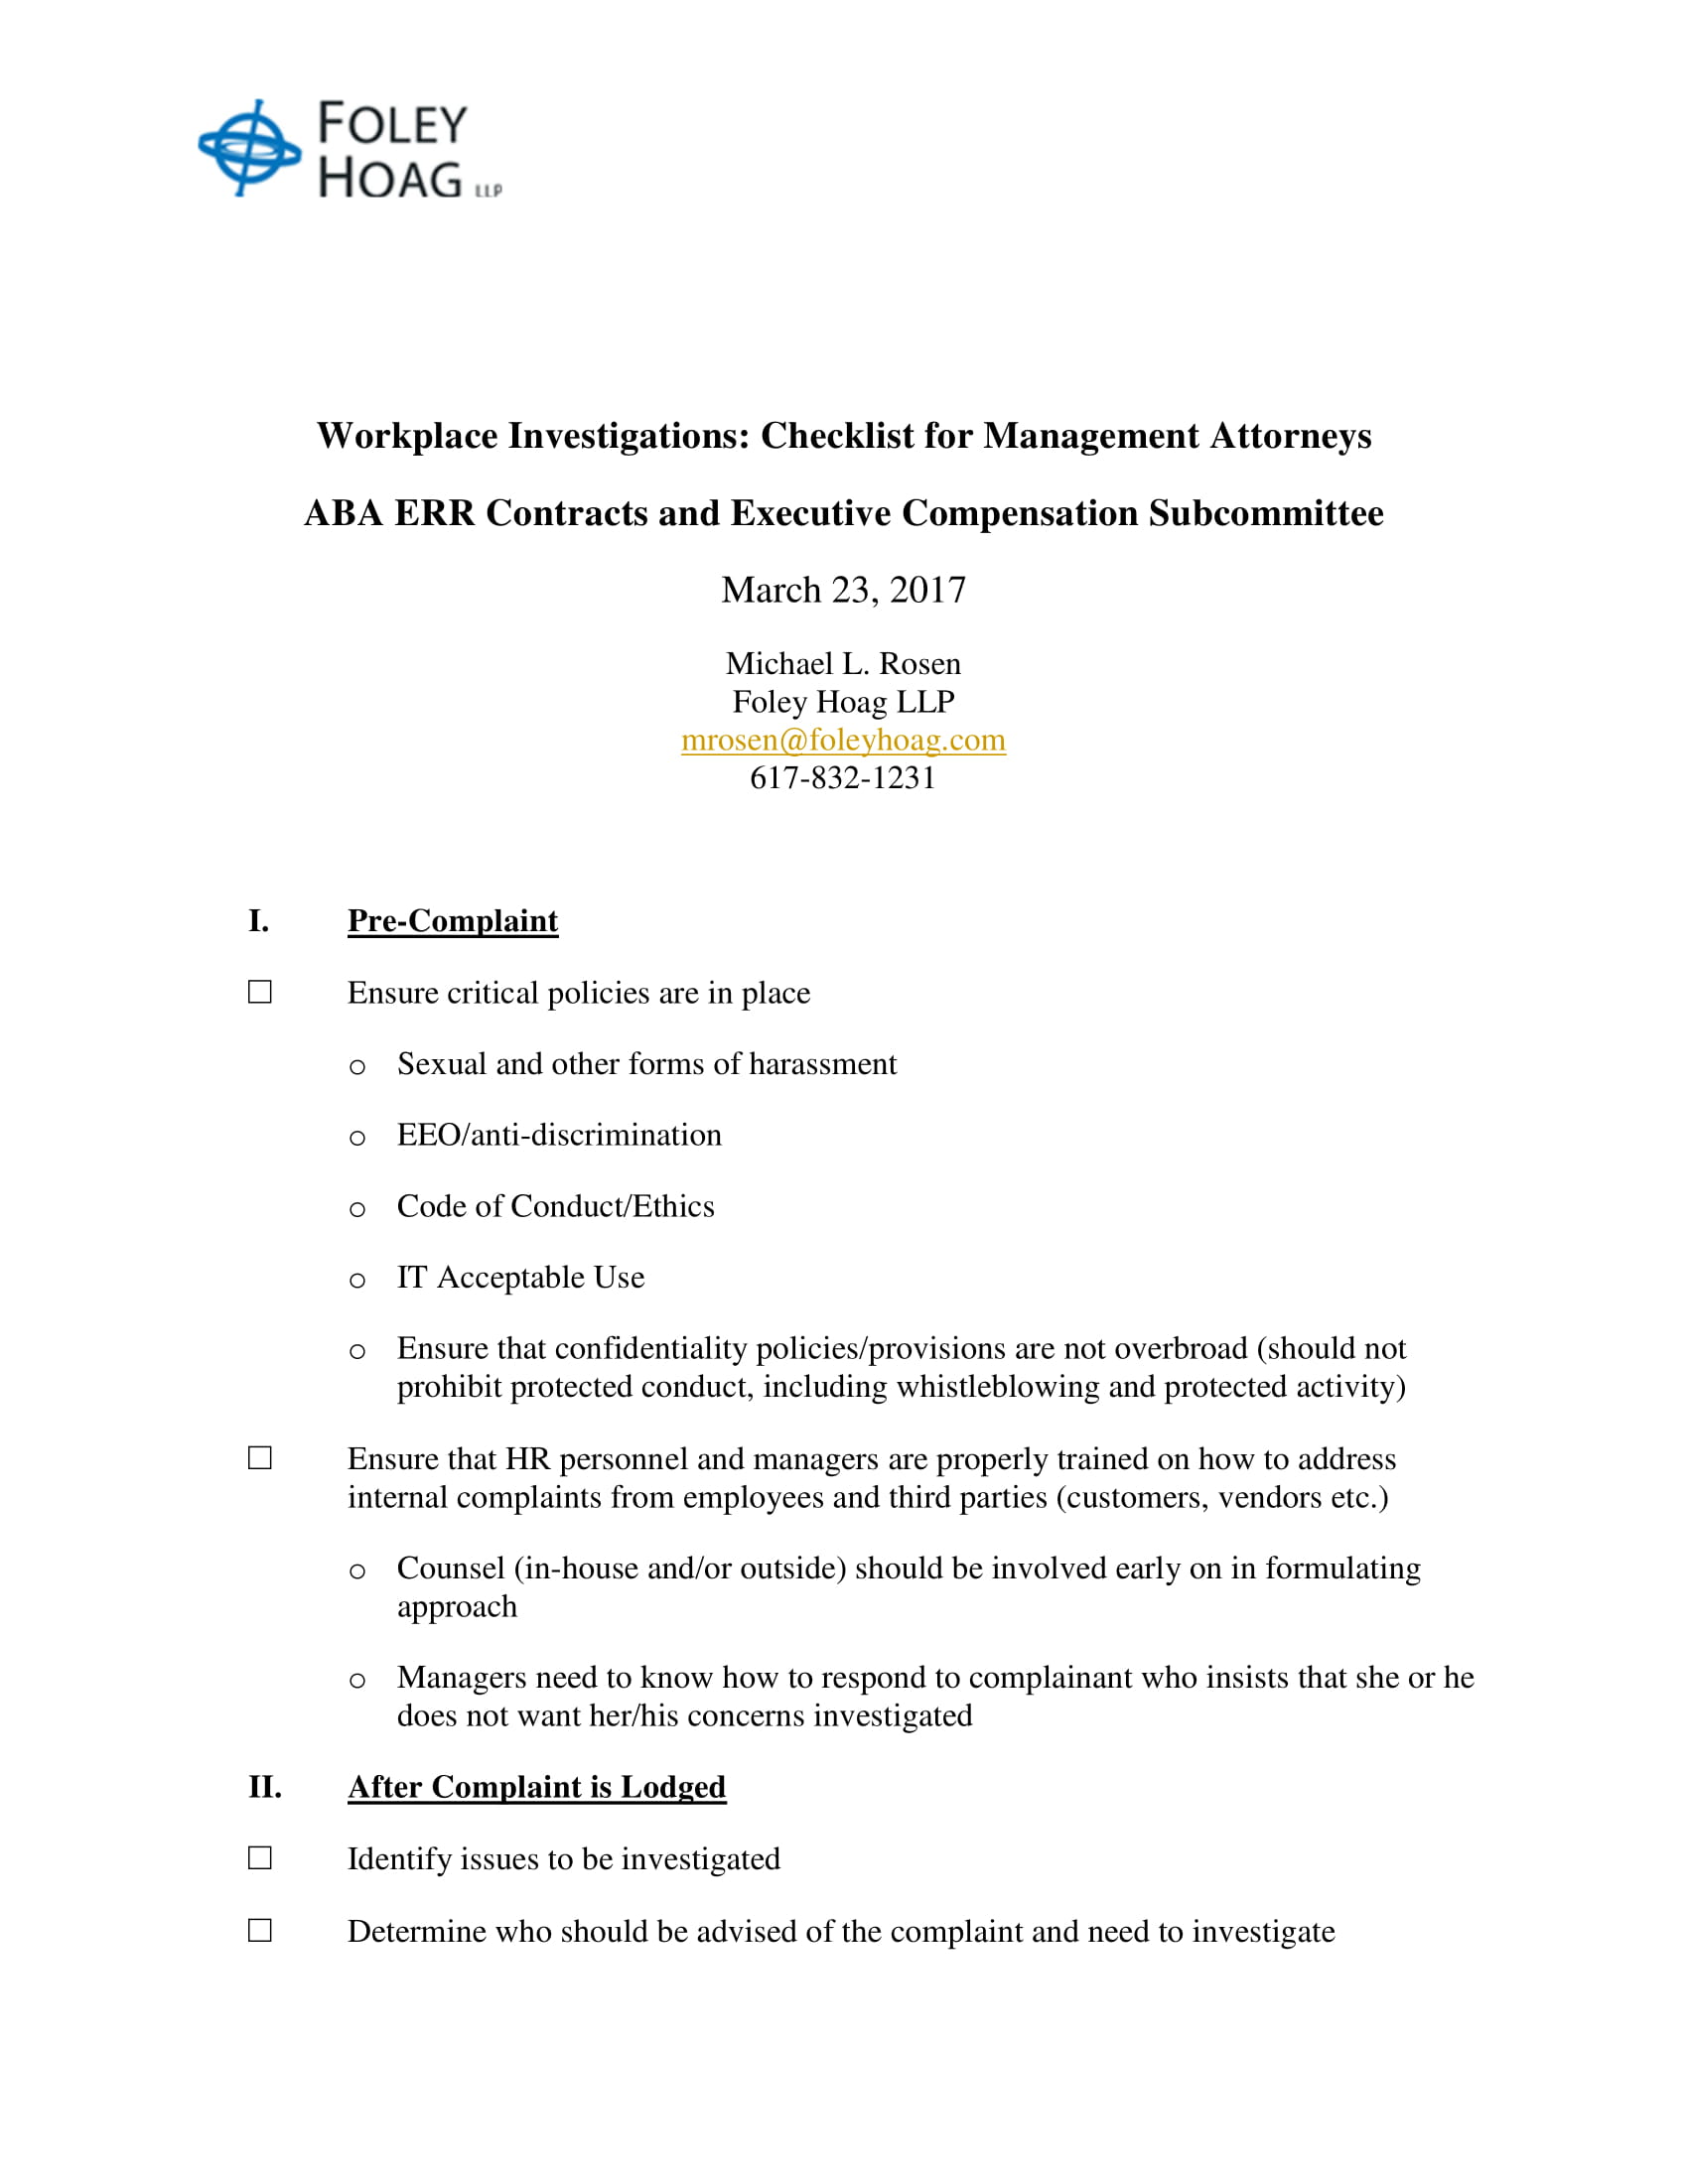 checklist for workplace investigations due to harassment complaints example